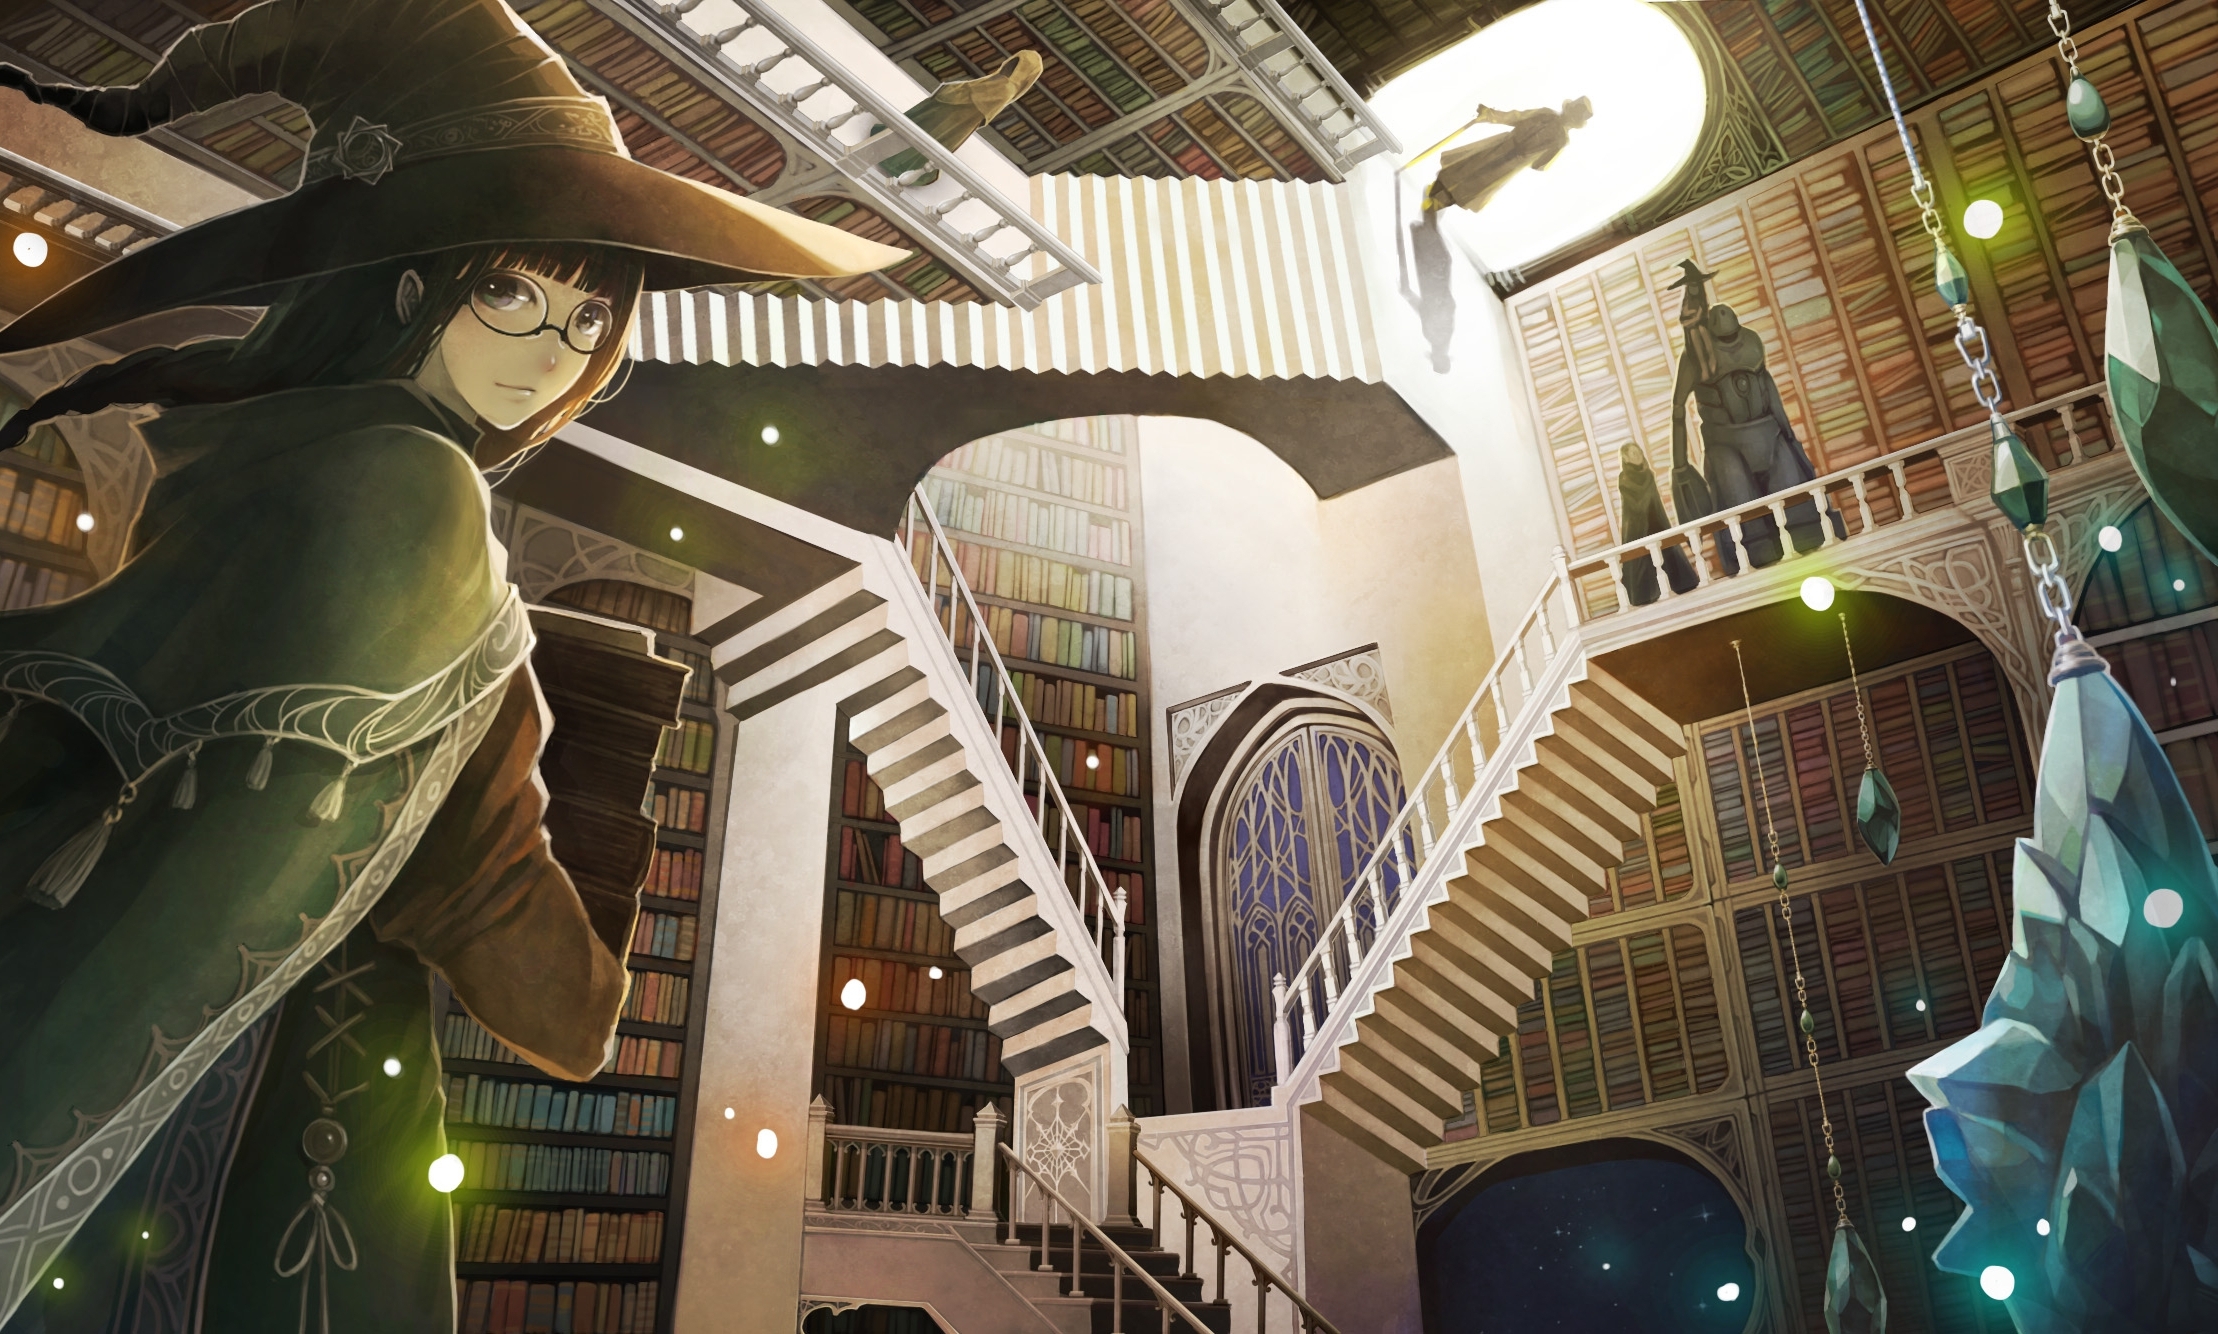 Wallpaper Anime Girl, Witch, Books, Fantasy, Library, Stairs:2218x1334